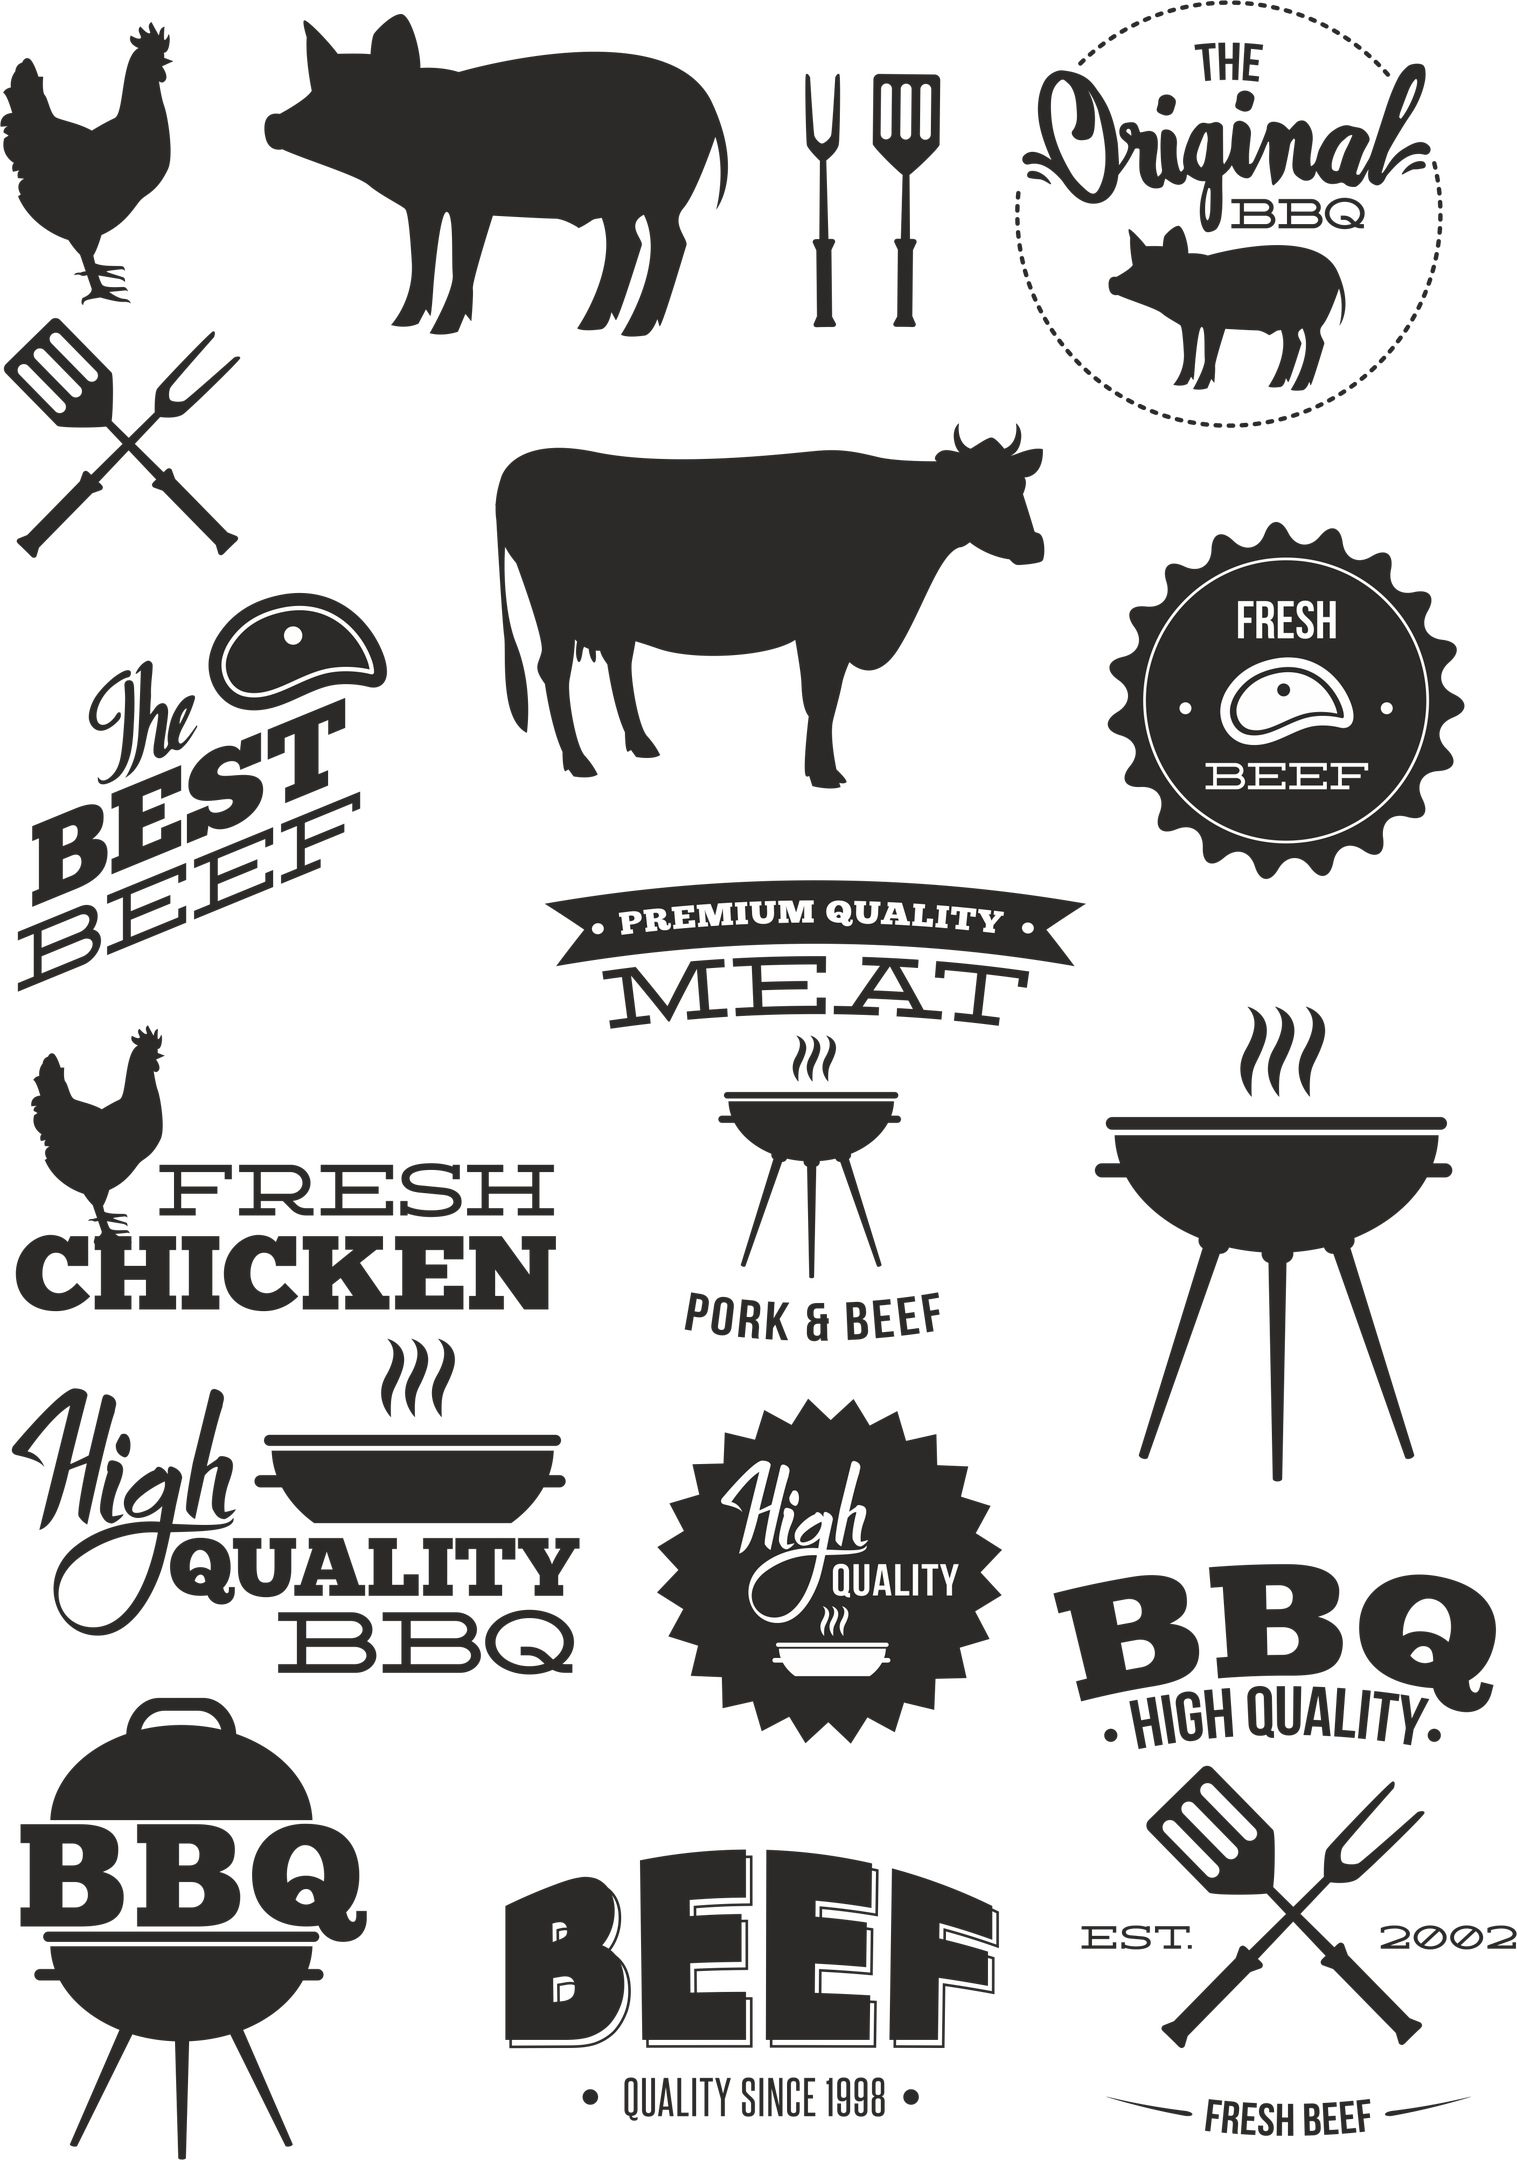 BBQ Vector Set Free Vector cdr Download - 3axis.co